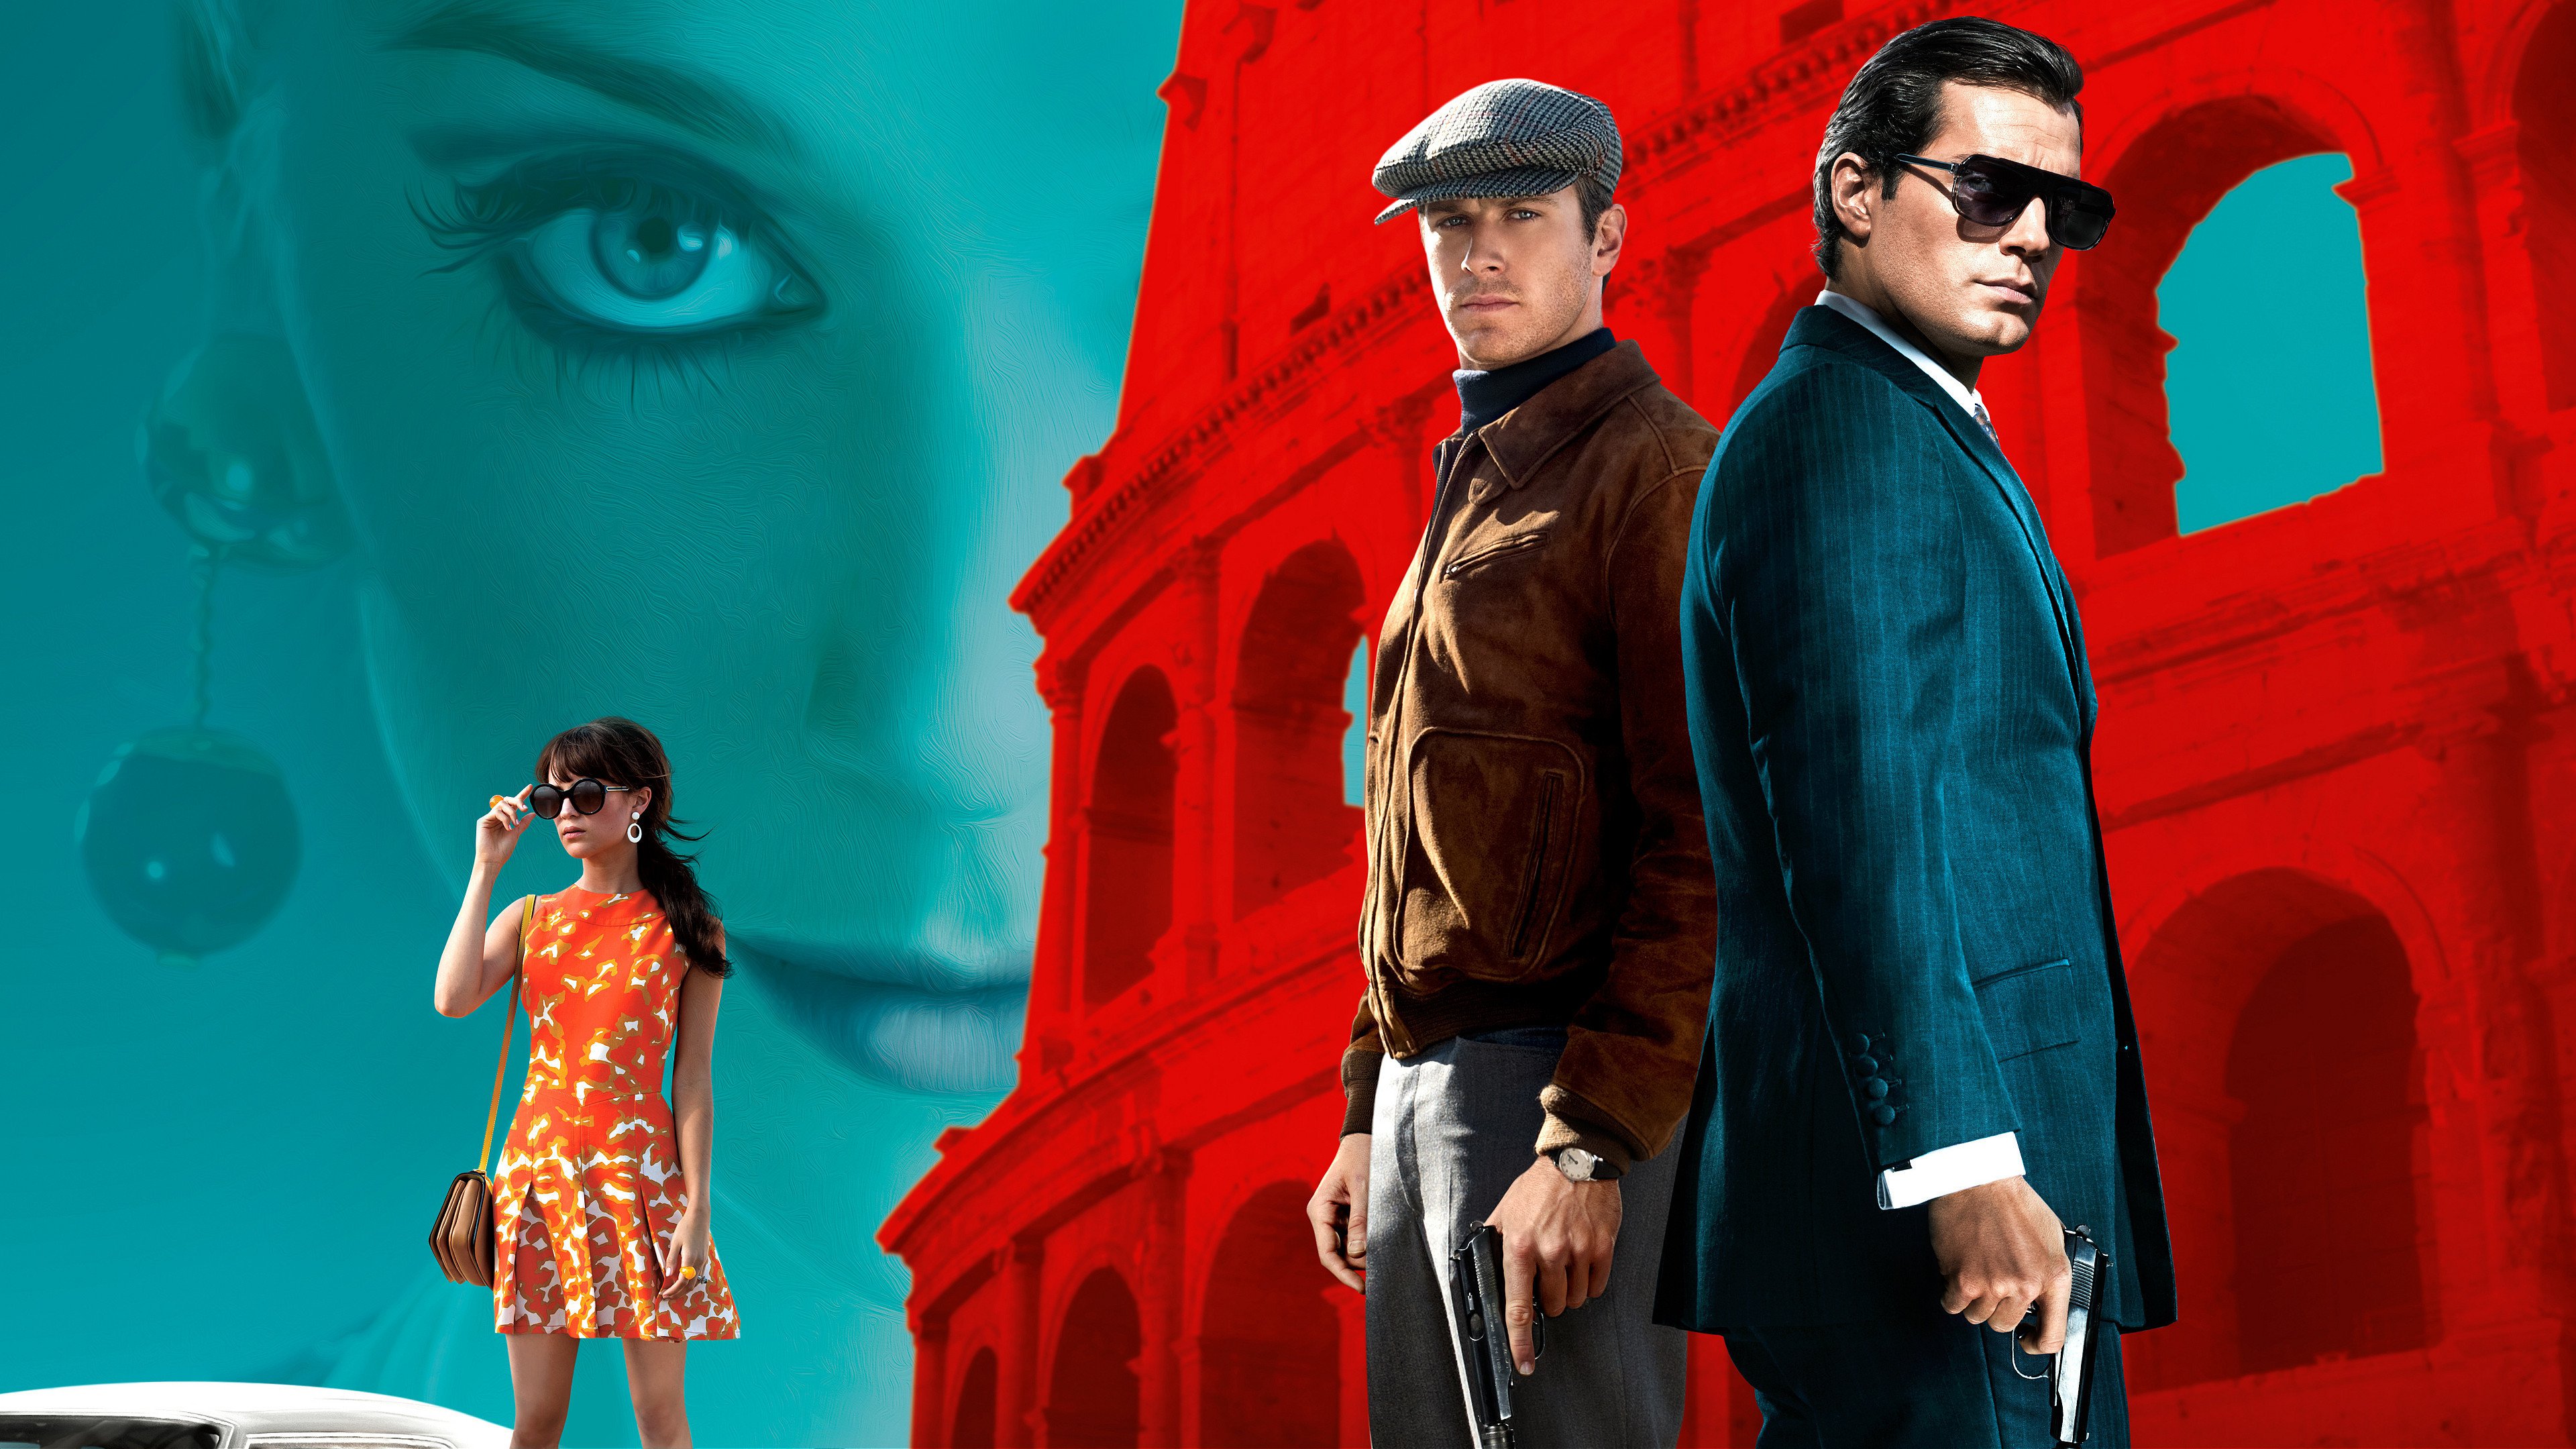 The Man From U.N.C.L.E. Wallpapers